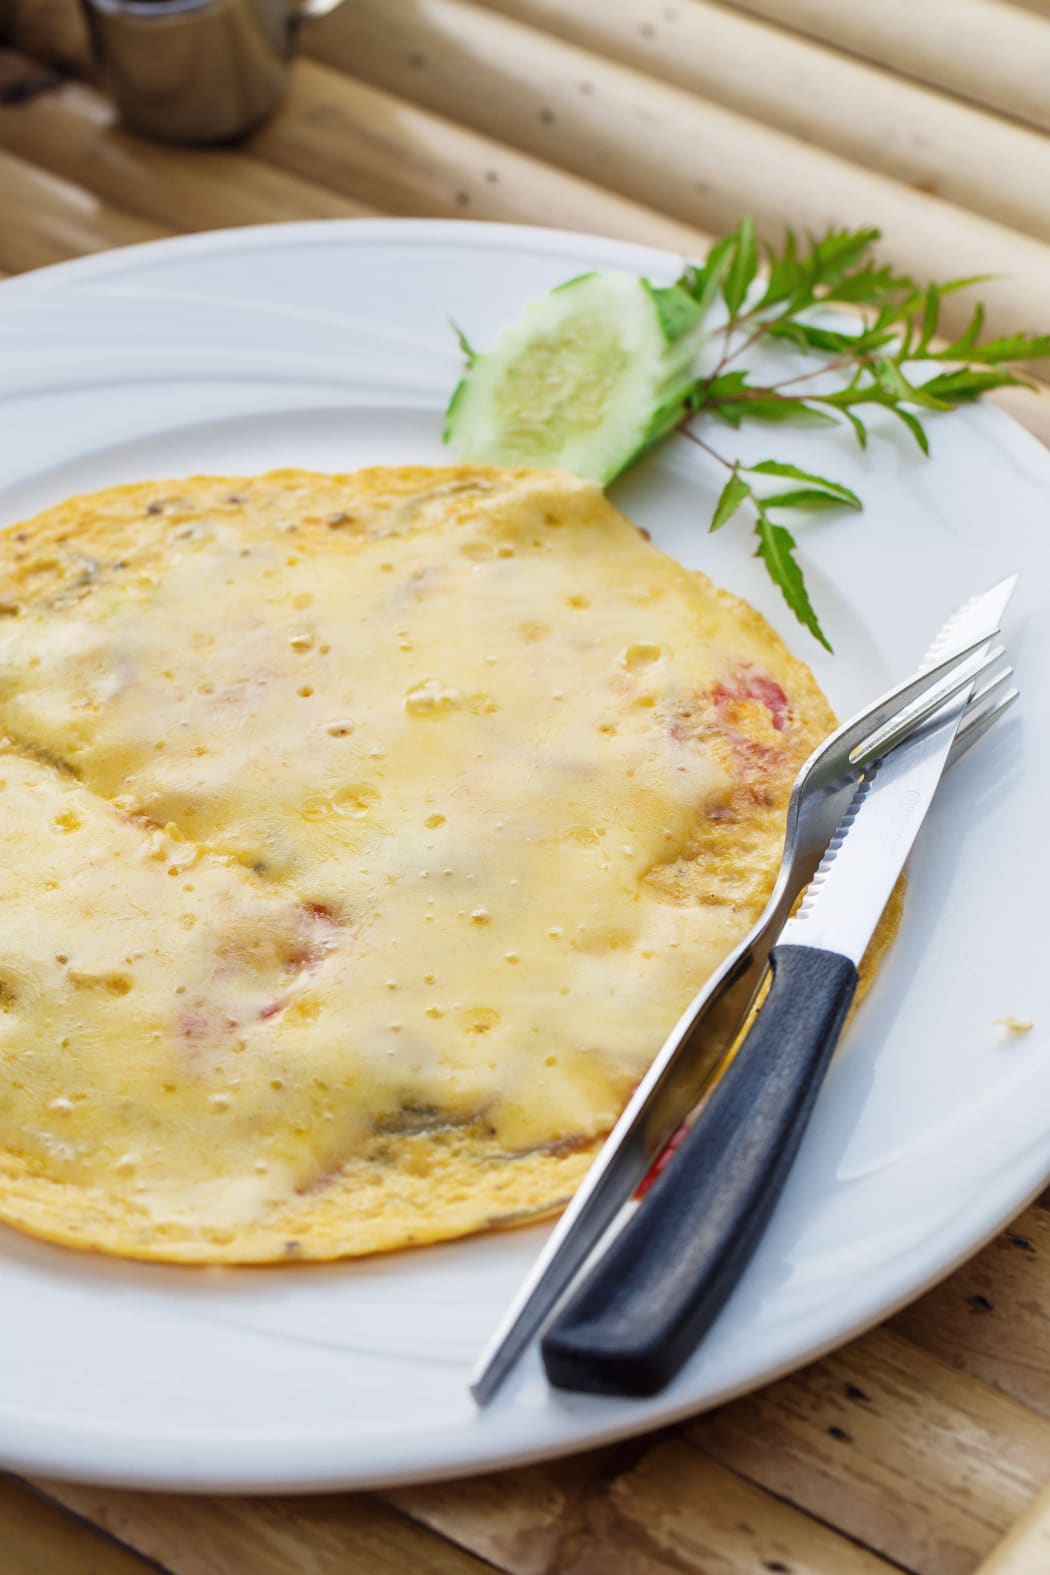 Cheese omelette with cucumber on a plate